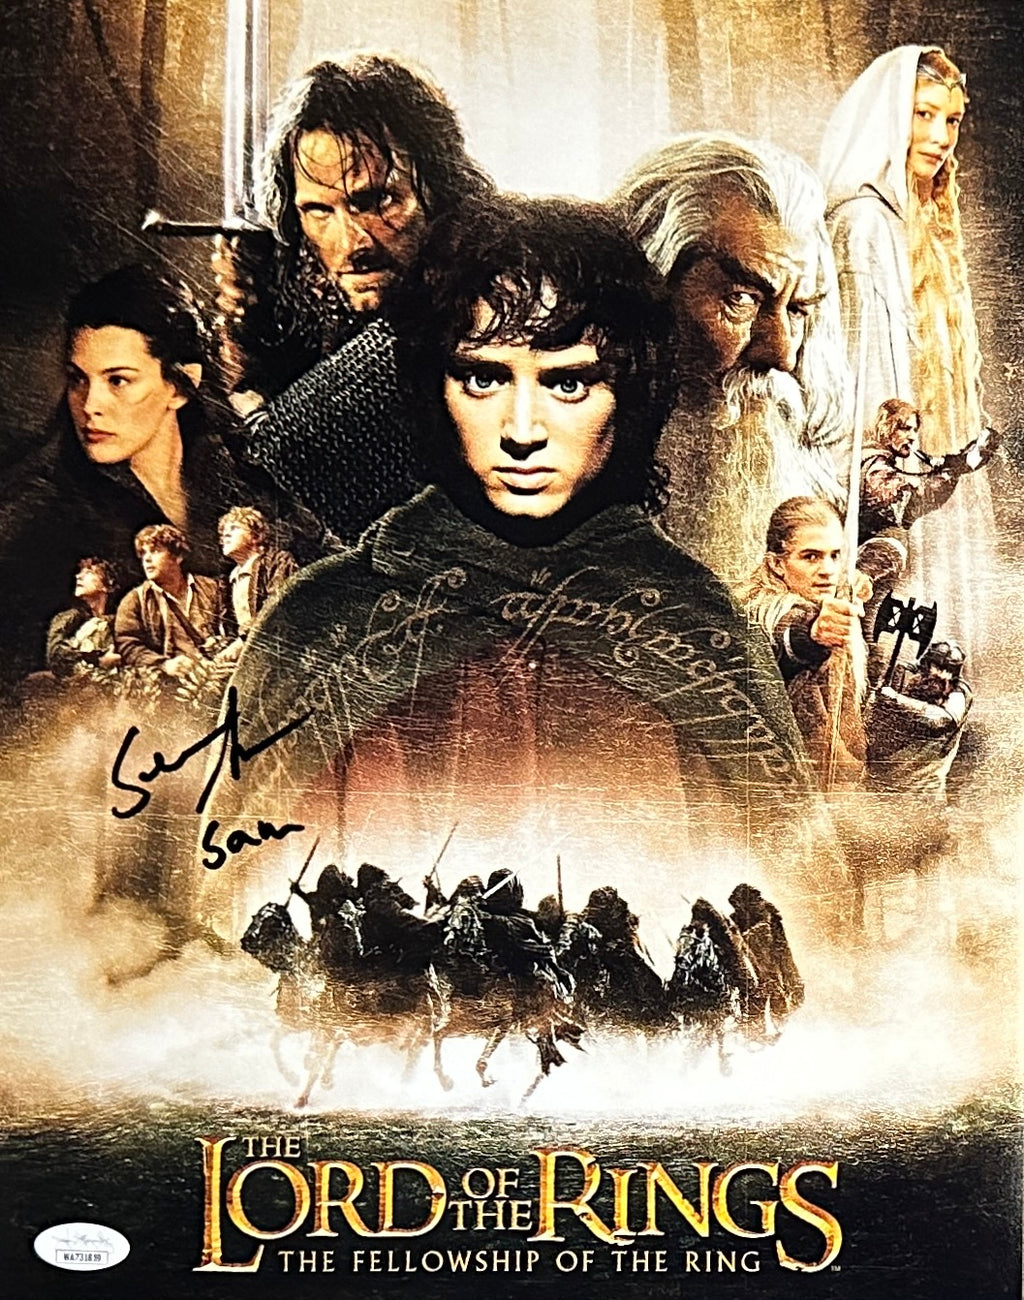 Sean Astin autographed signed inscribed 11x14 photo JSA Lord of the rings Sam